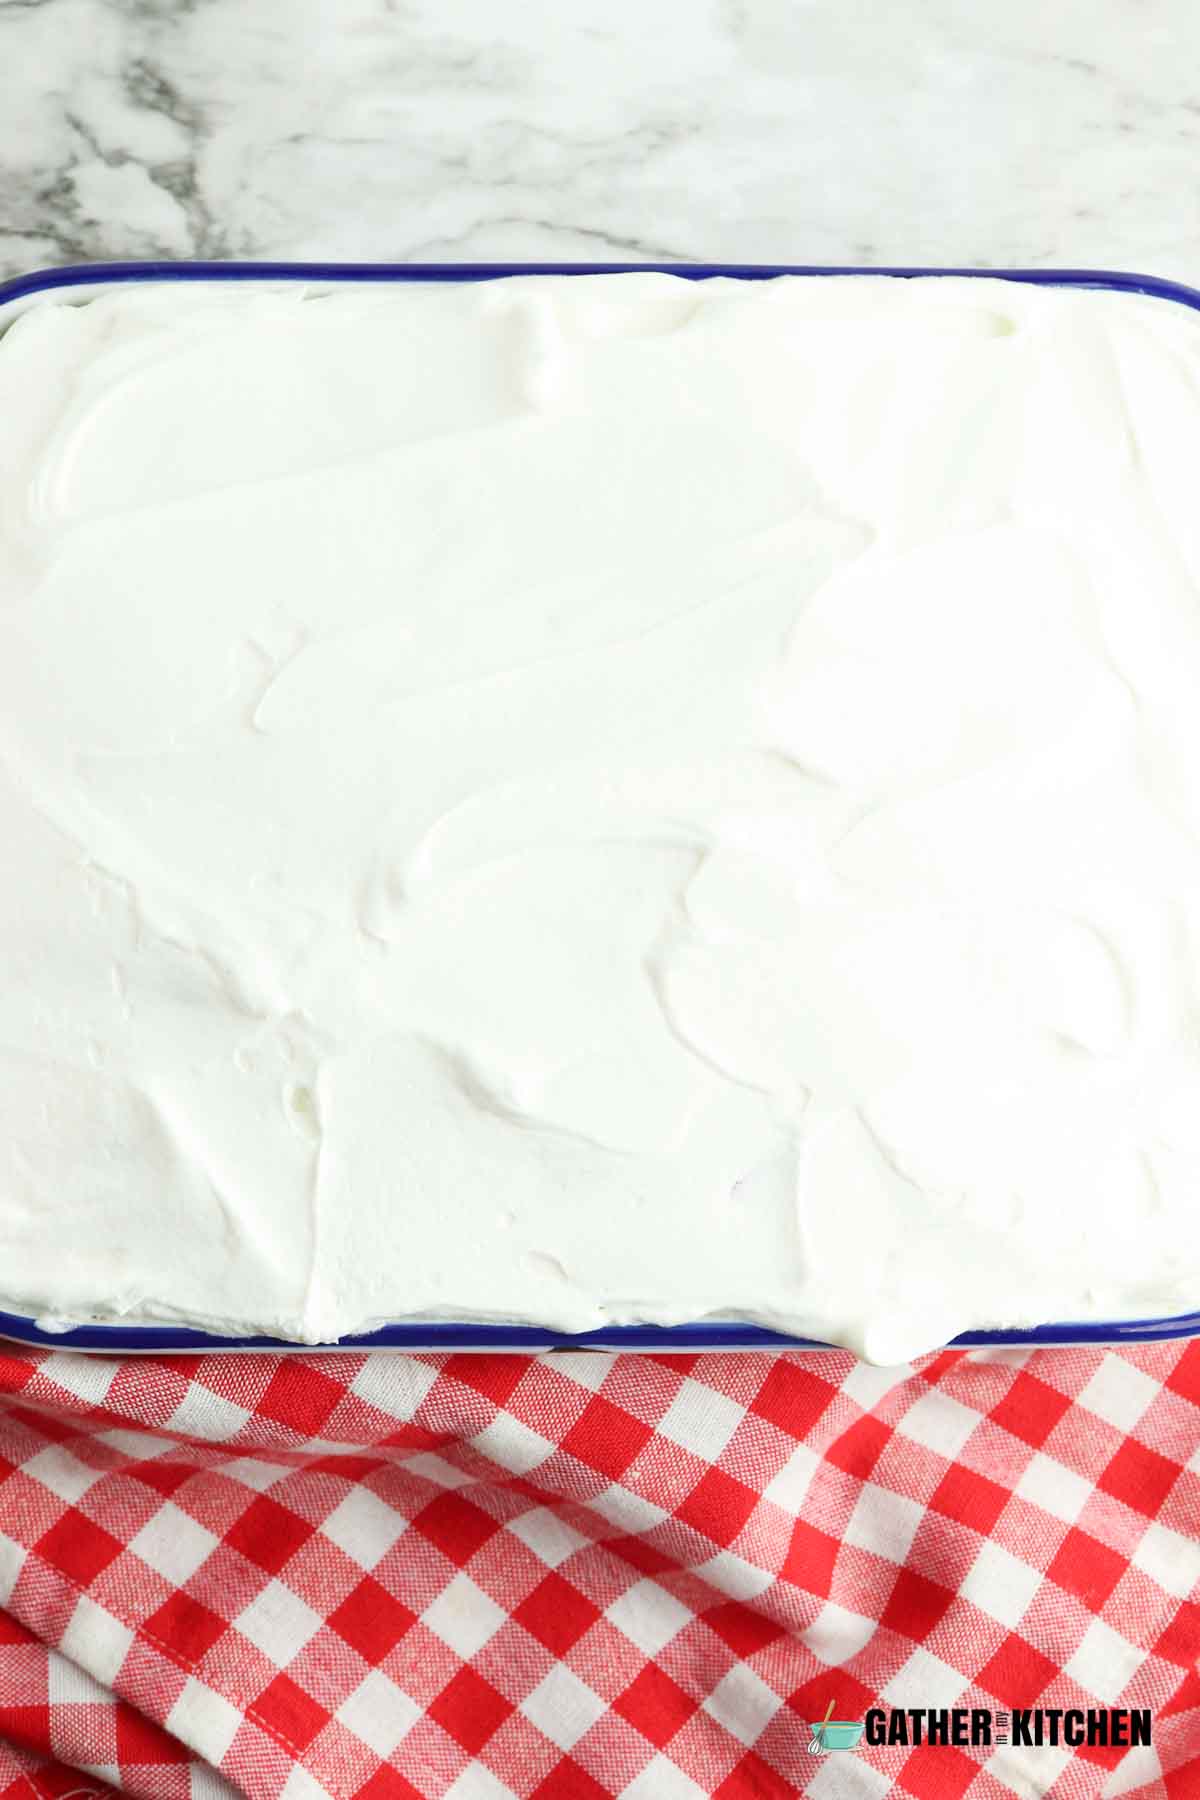 Whipped topping on top of berry layer.